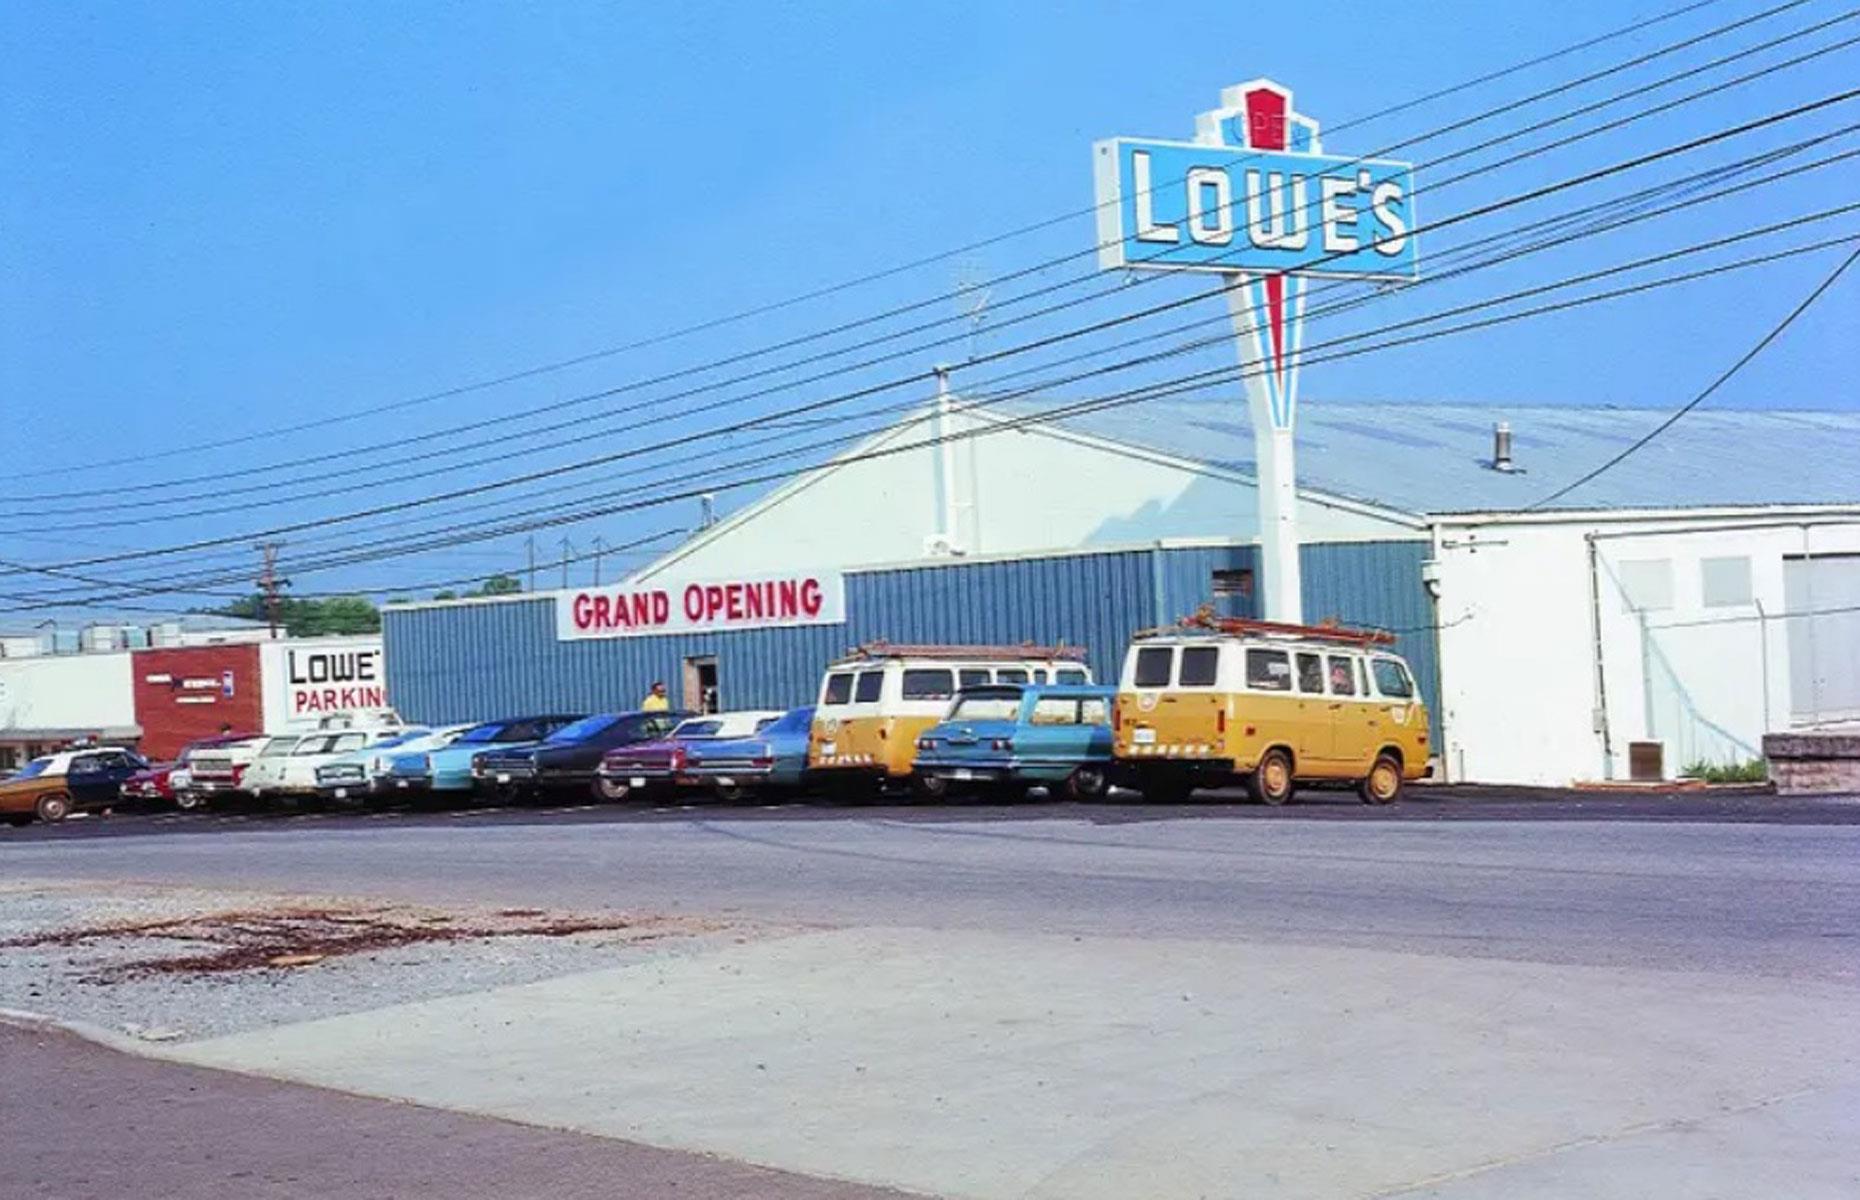 1961 – Lowe's: $1,000 invested then is worth $12.4 million (£4.2m) + dividends today